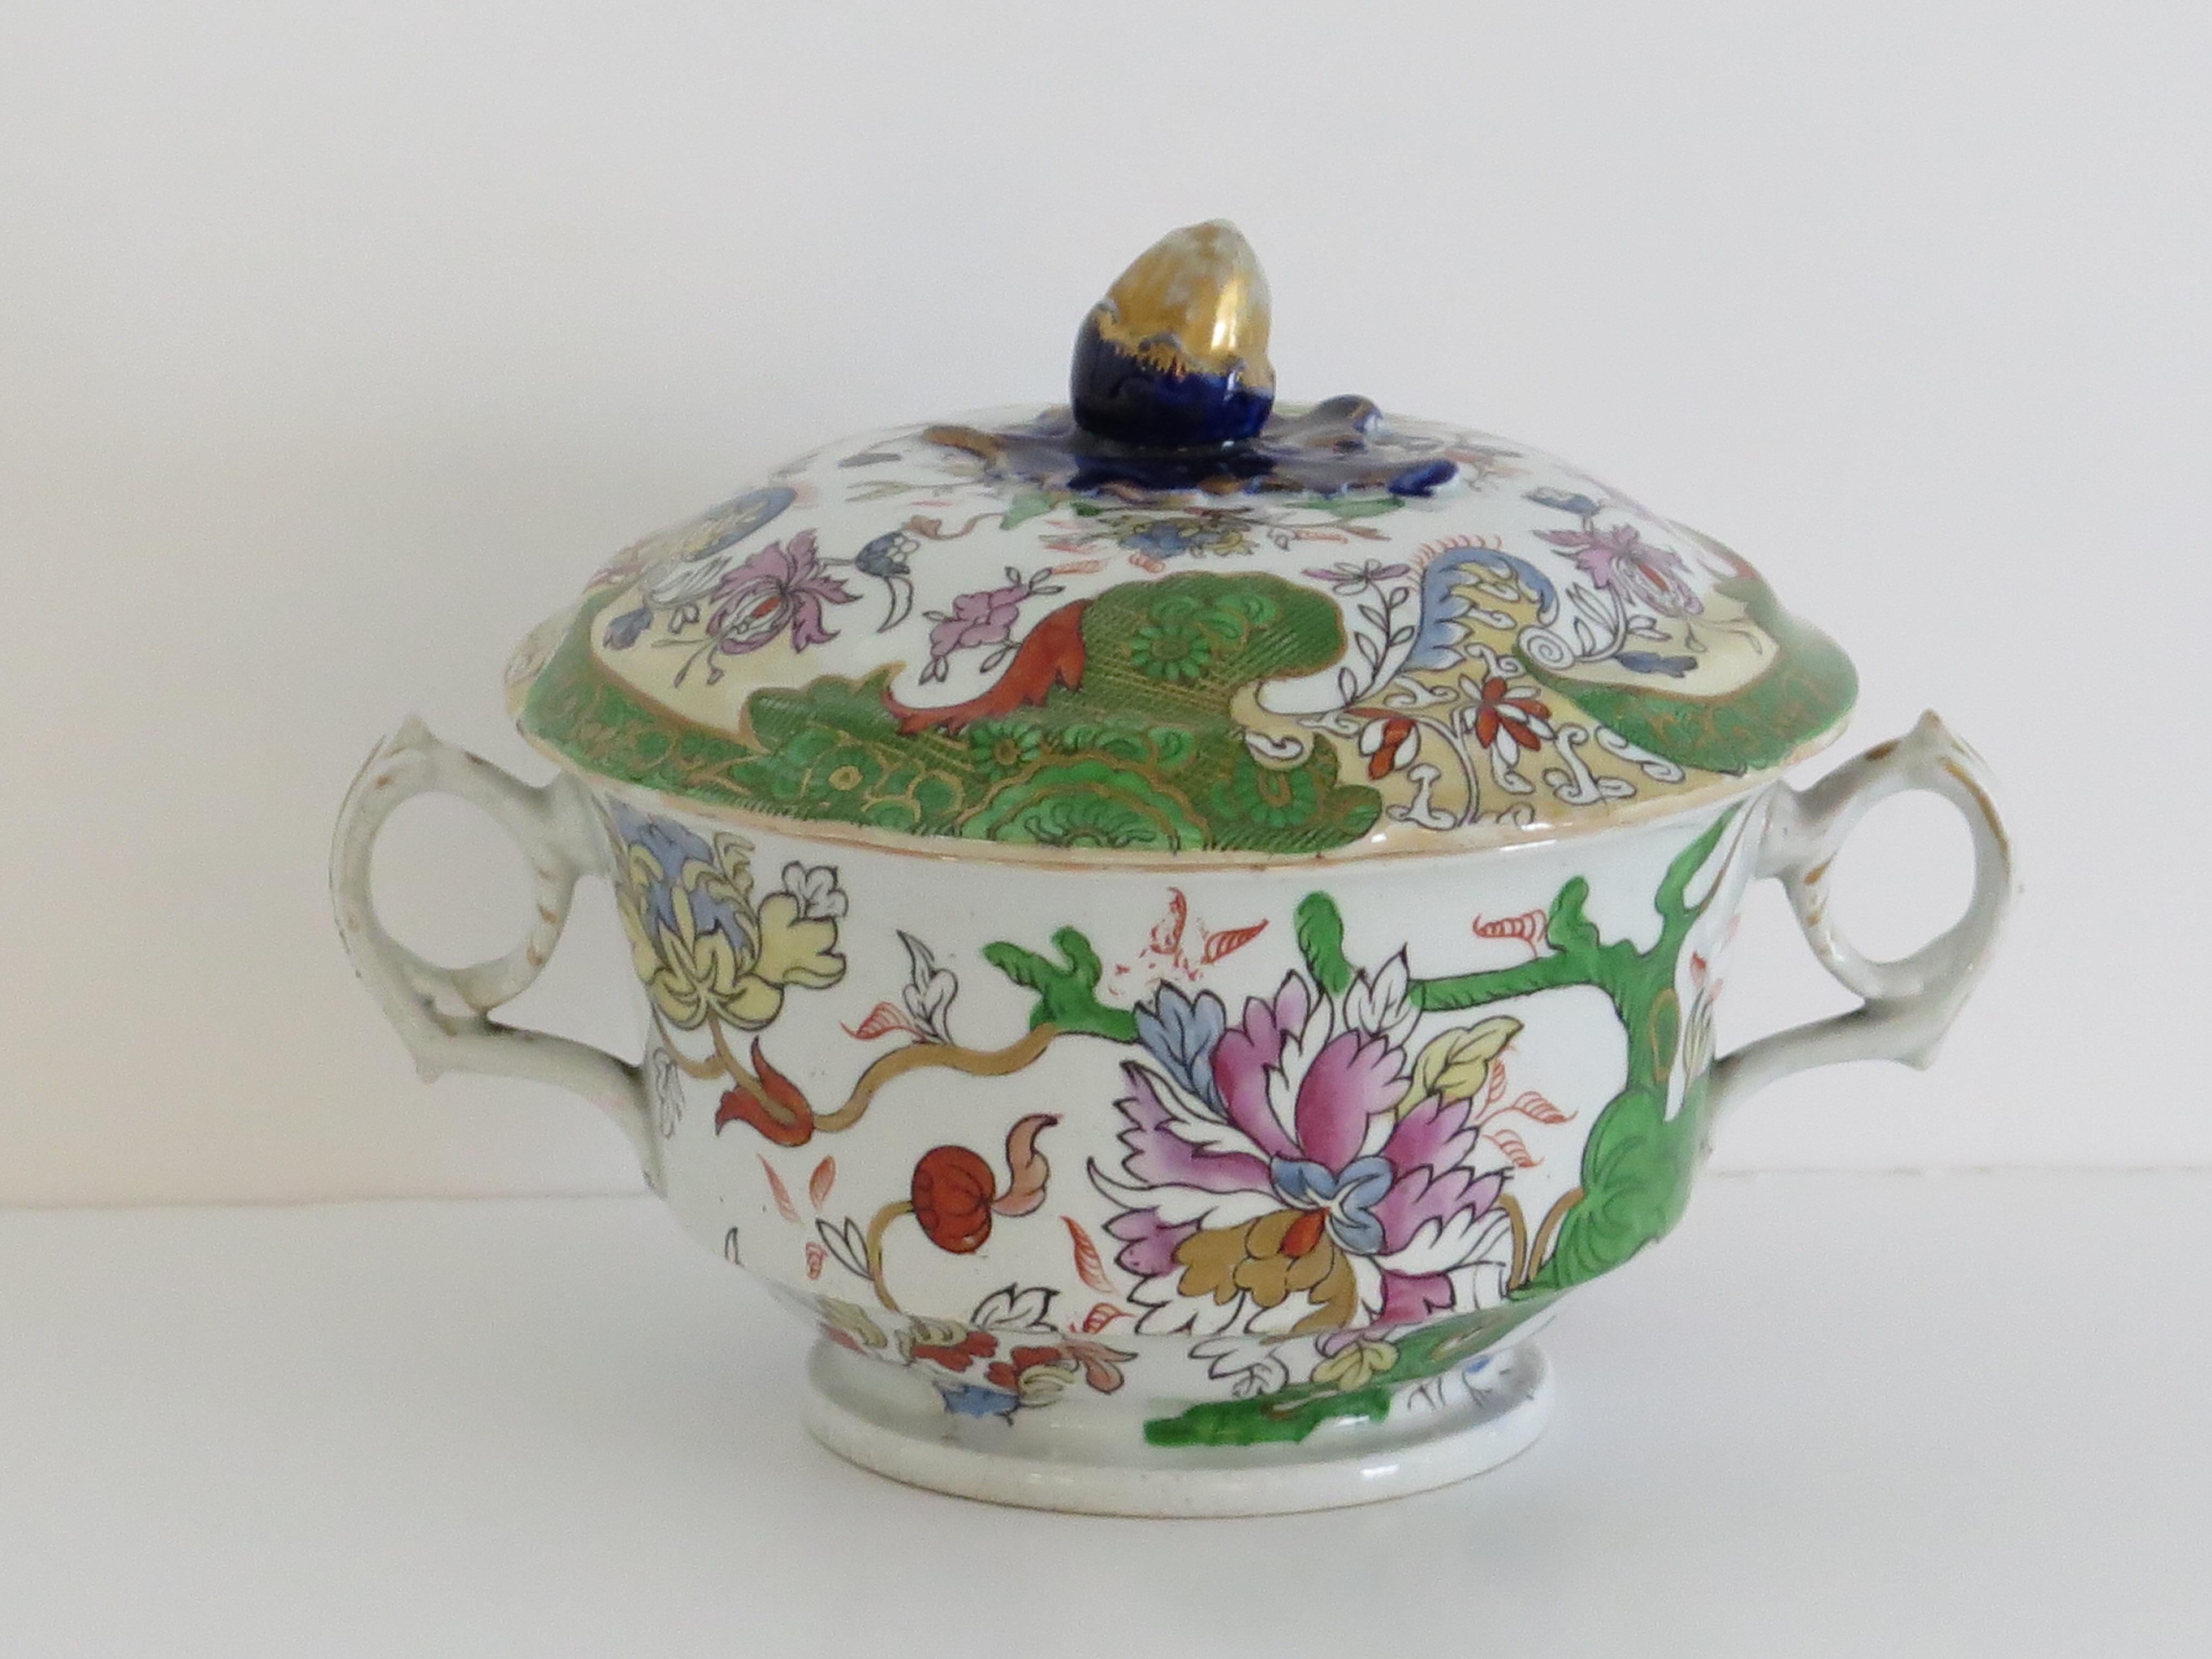 This is a very decorative Ironstone Sauce Tureen, complete with lid , made by Mason's of Lane Delph, Staffordshire, England, during the late Georgian period of the early part of the 19th century, circa 1830.

This tureen is well potted with a